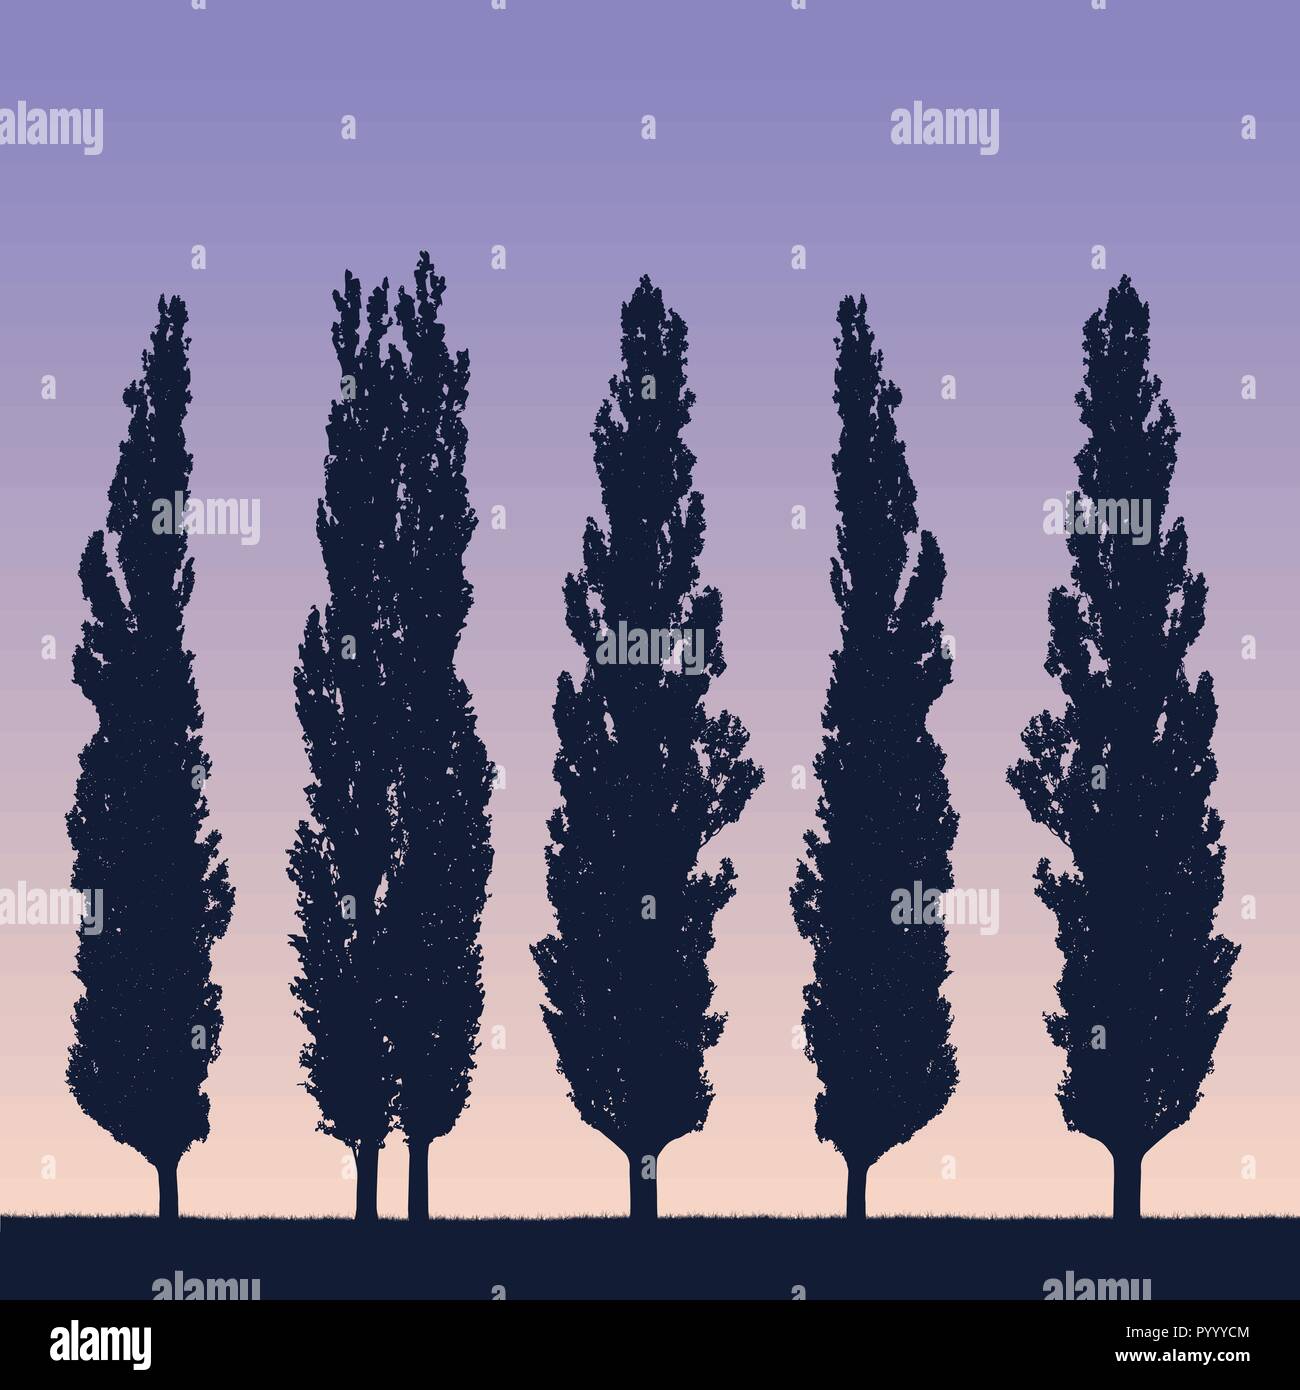 Realistic illustration of a landscape and row of poplars like a windbreak on the shore of grass under a purple blue sky with the rising or setting sun Stock Vector